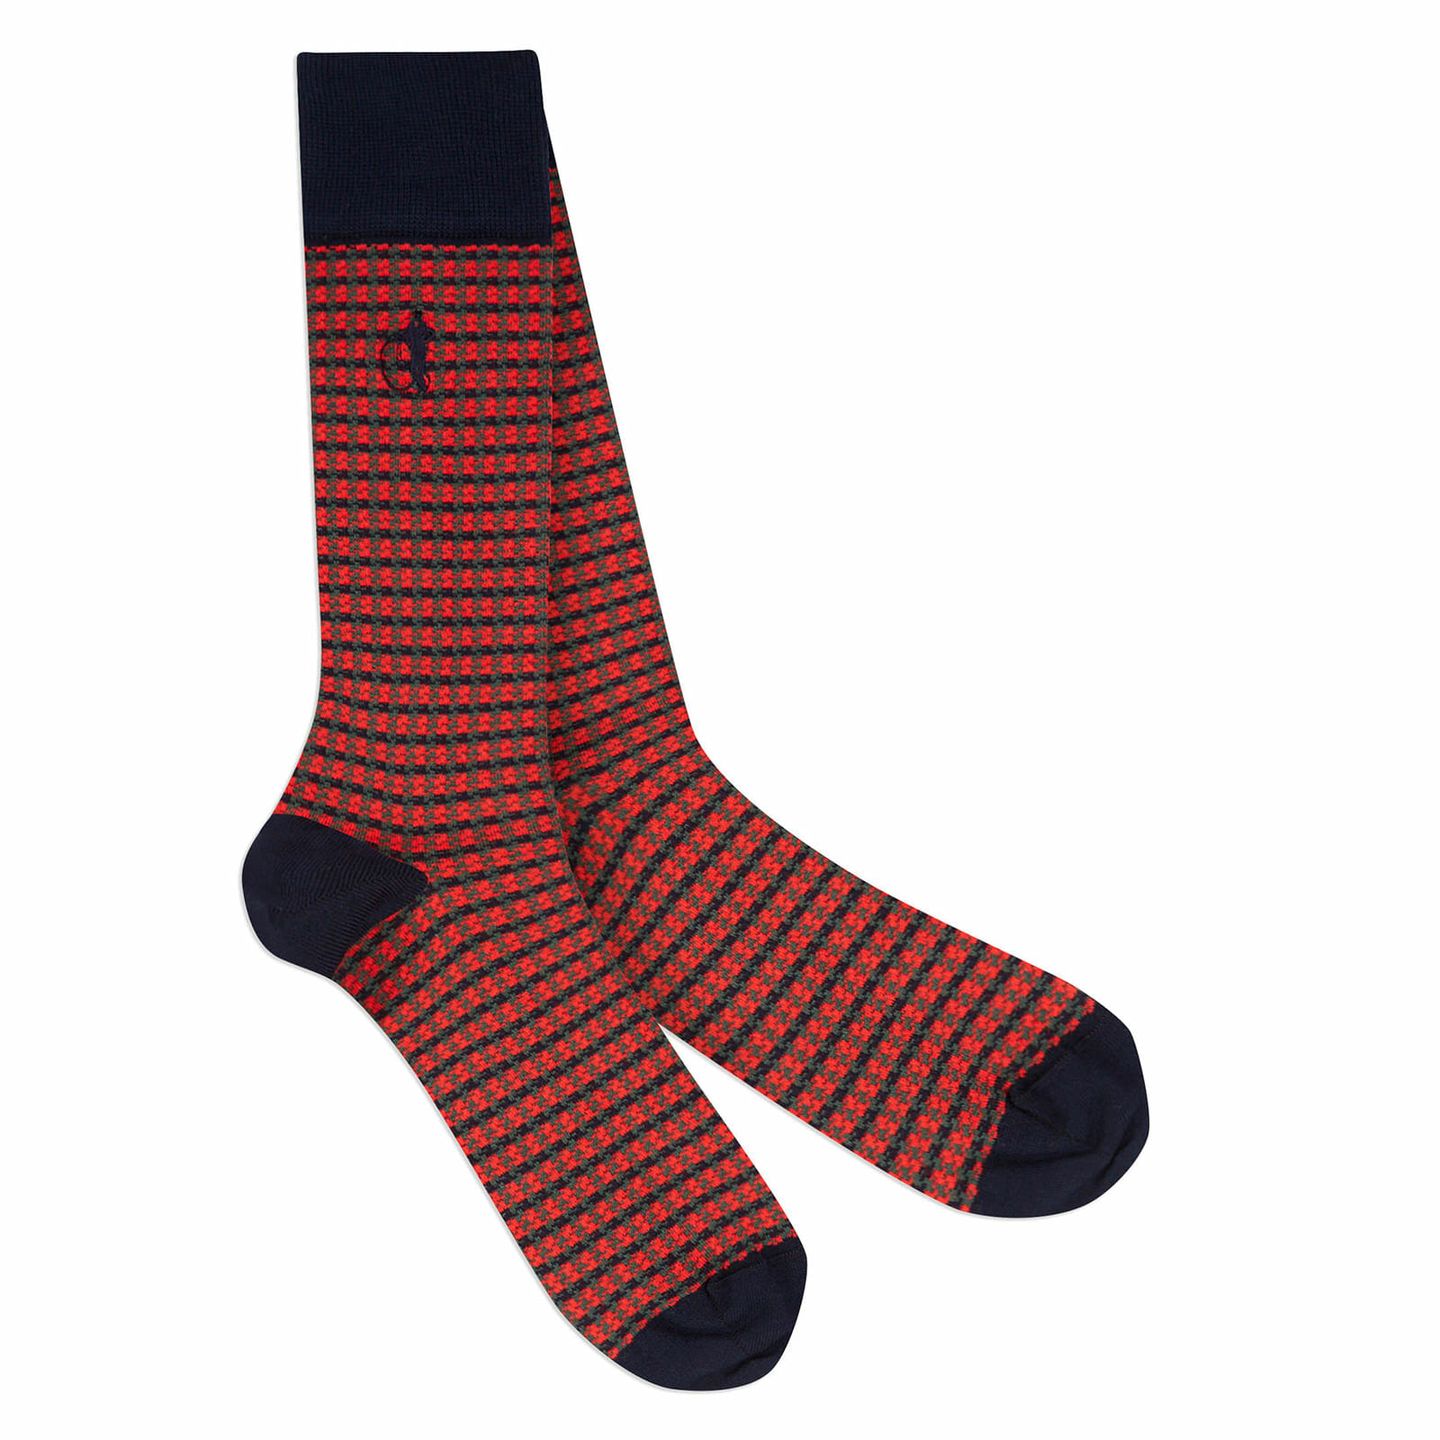 A pair of red and black lined socks with a white background